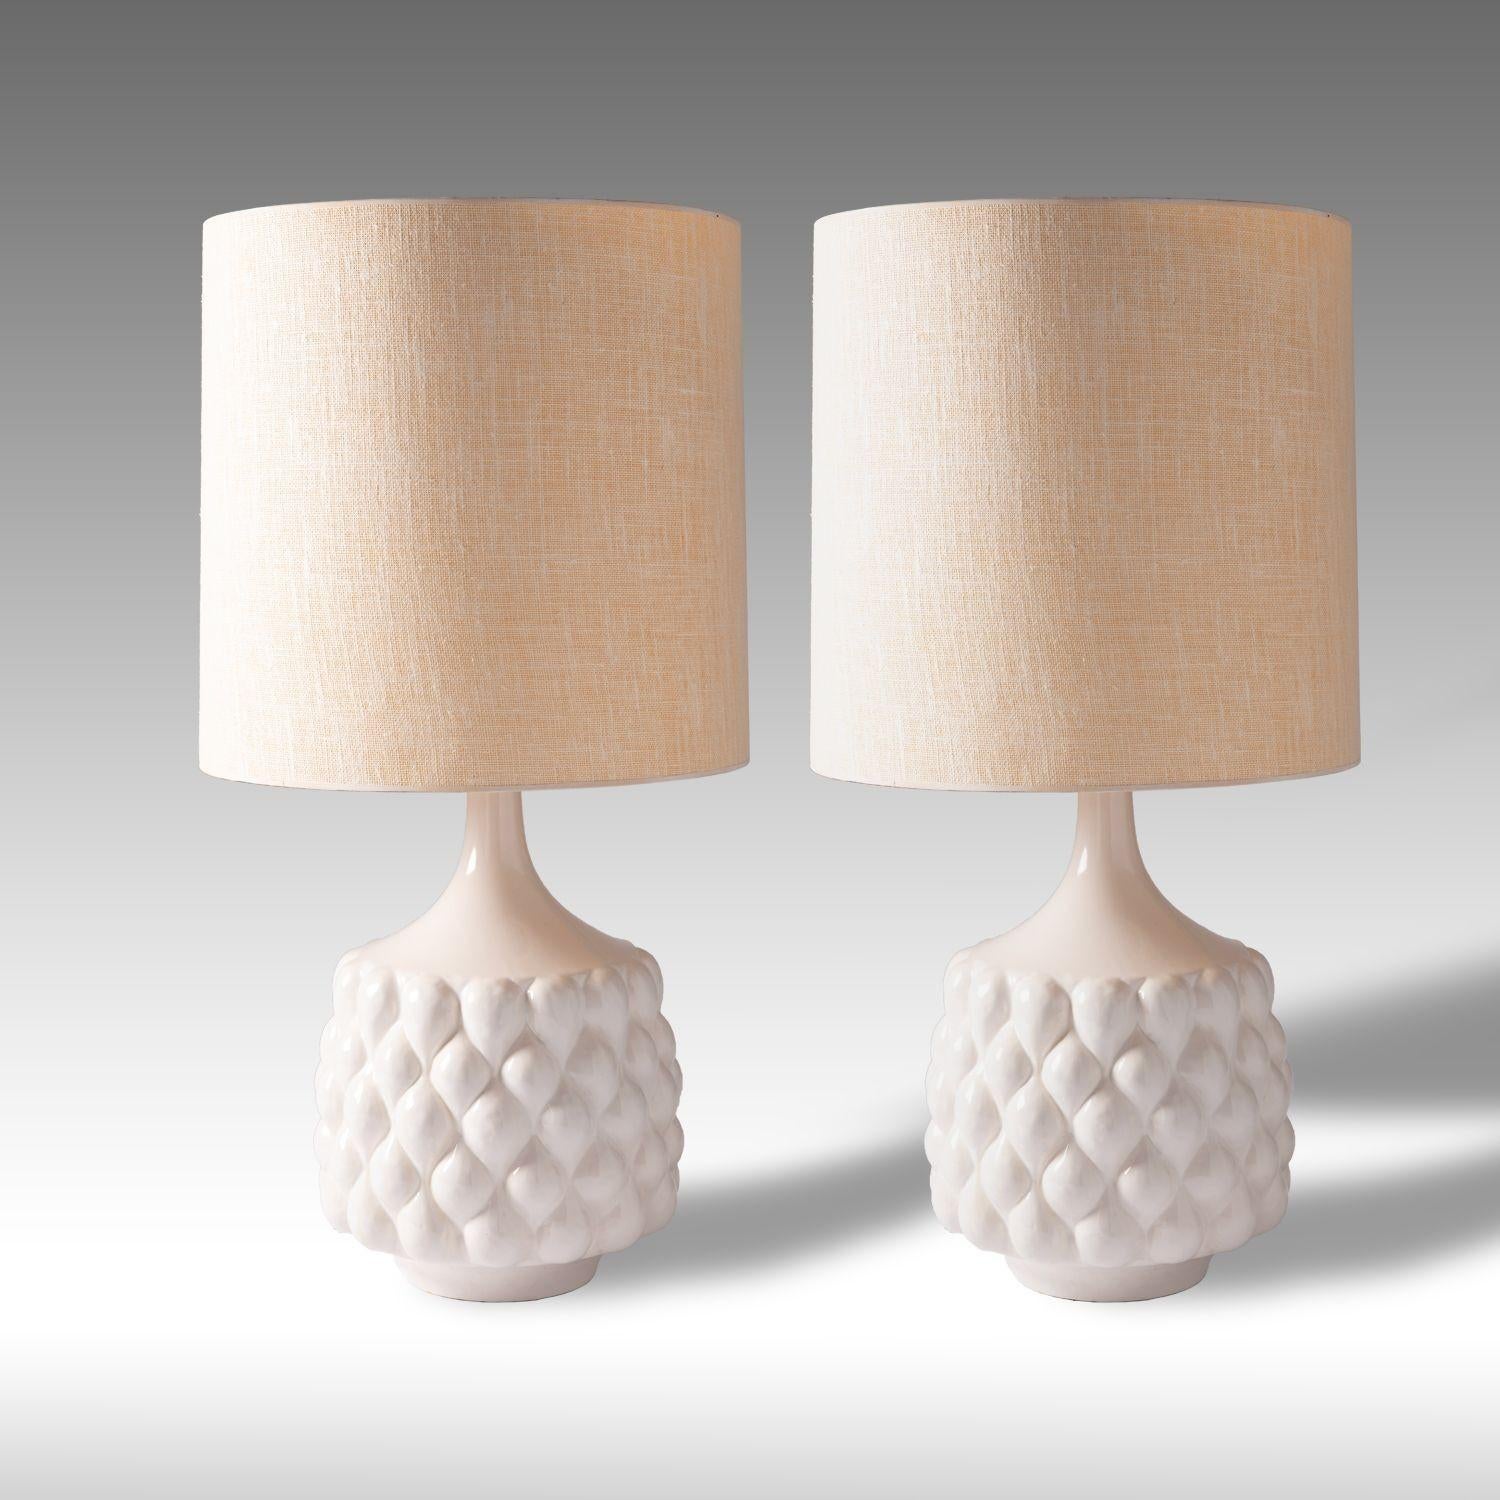 Pair of large-scale vintage contemporary ceramic lamps in an off-white glaze. Unmarked. In the style of David Cressey and the California Craft Movement. Rewired. Shades and harps not included.